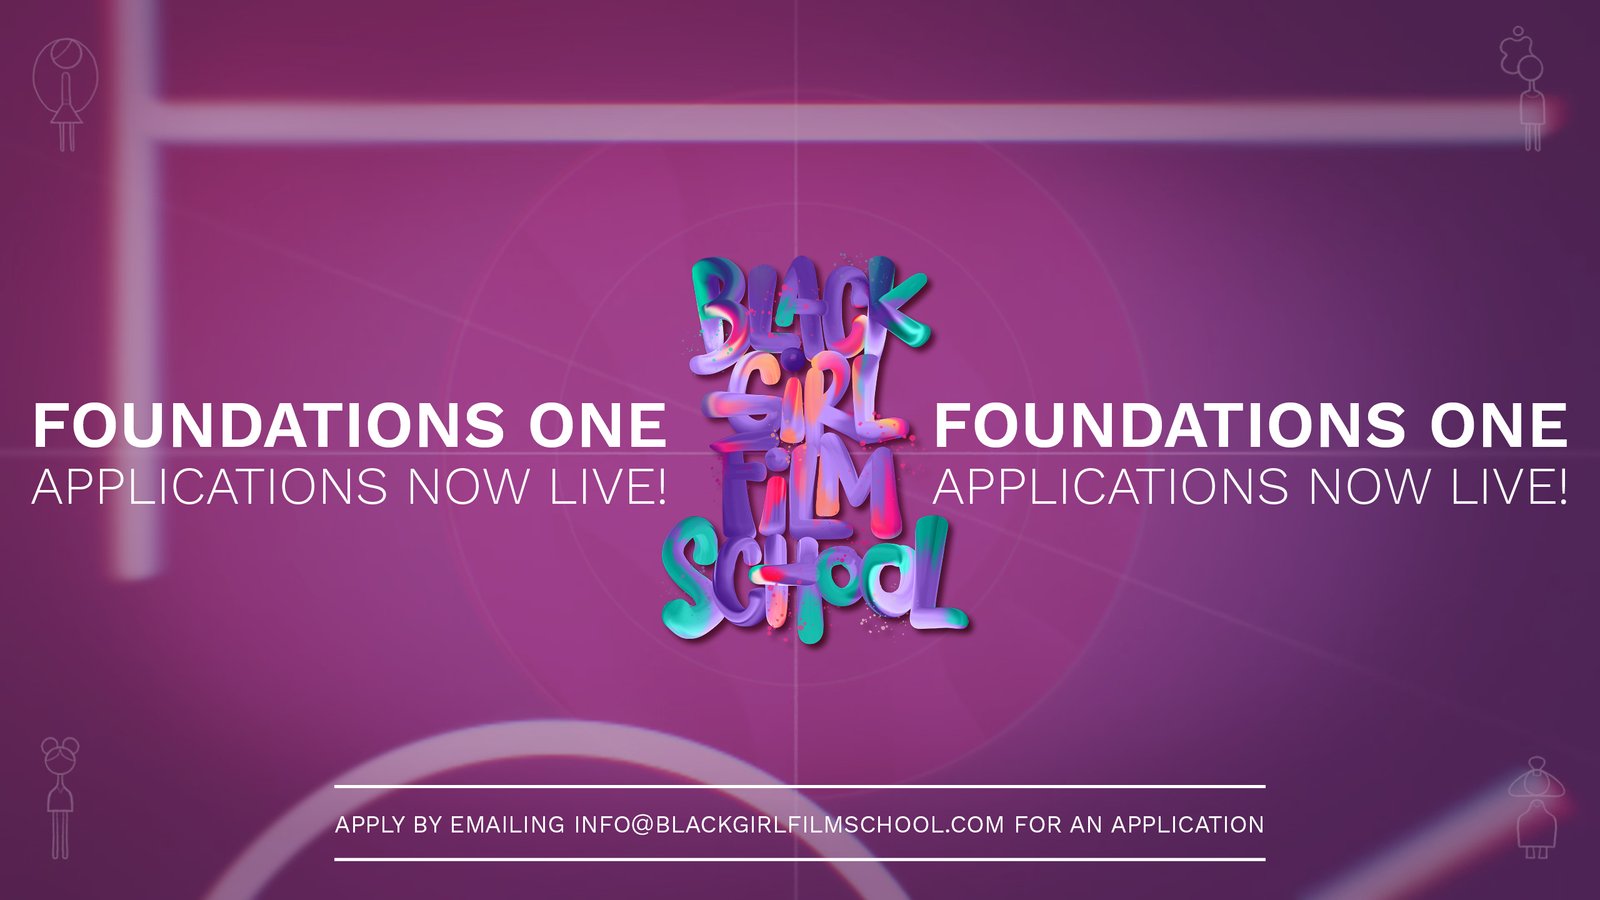 Foundations One applications now live!